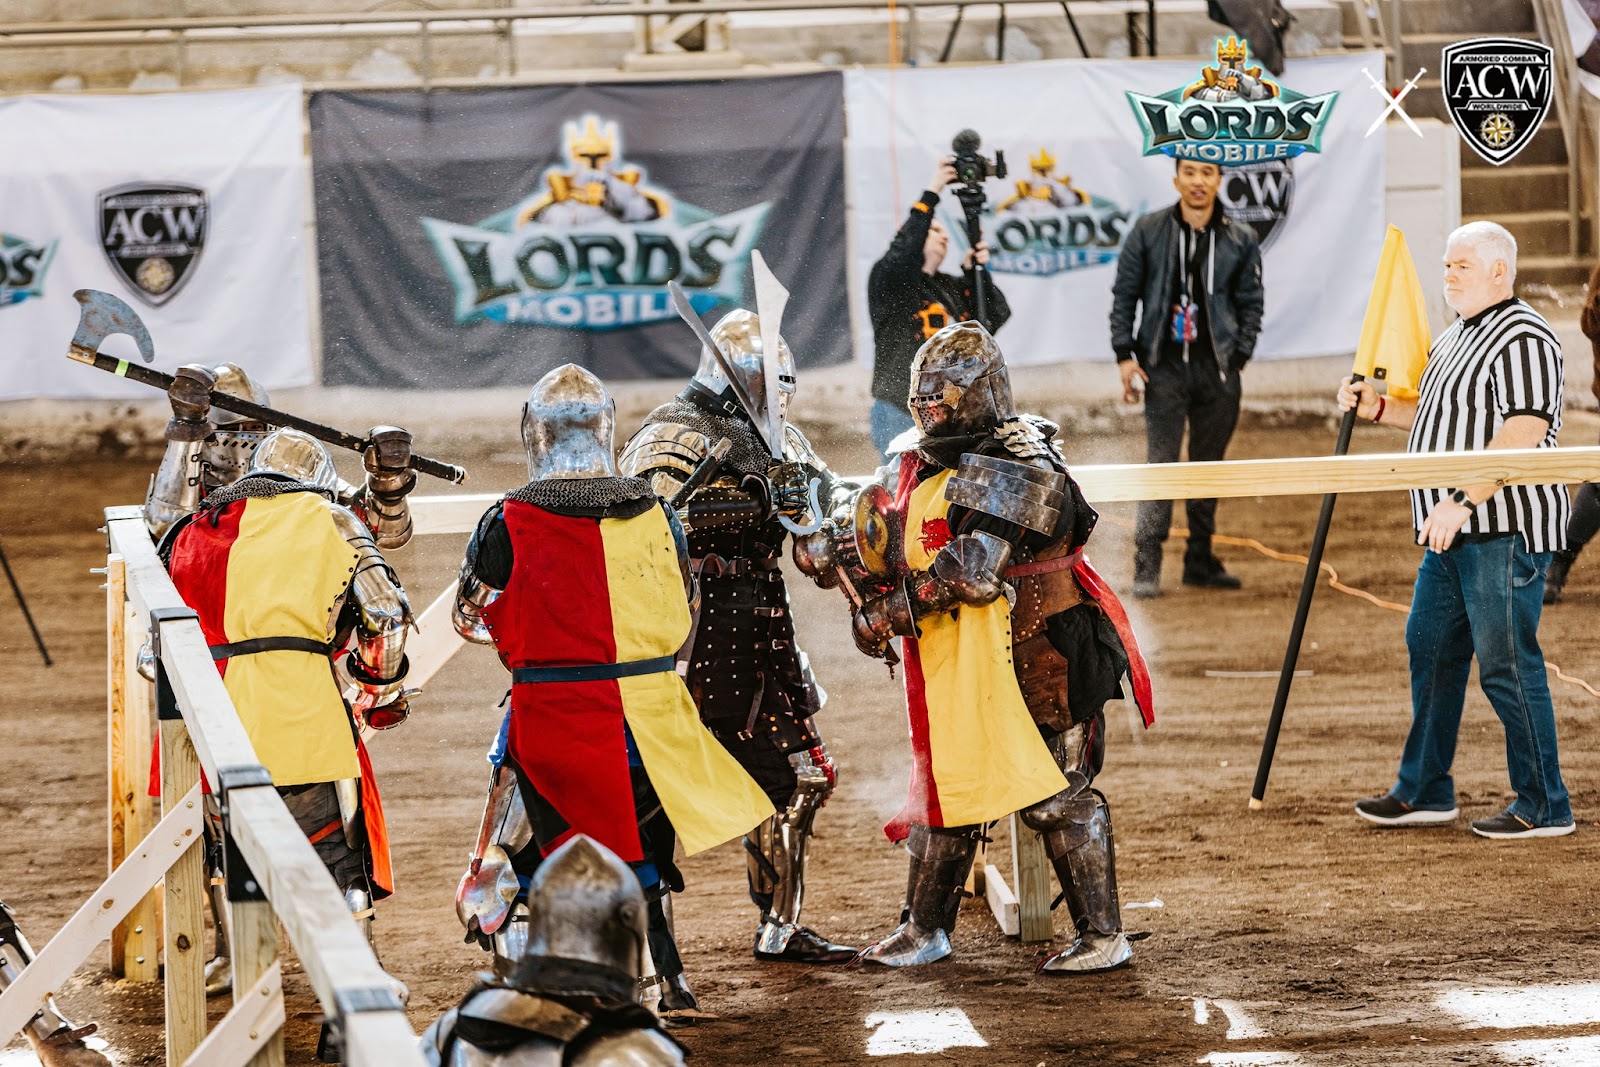 Lords Mobile x Armored Combat Worldwide Collab Roars to Life! 